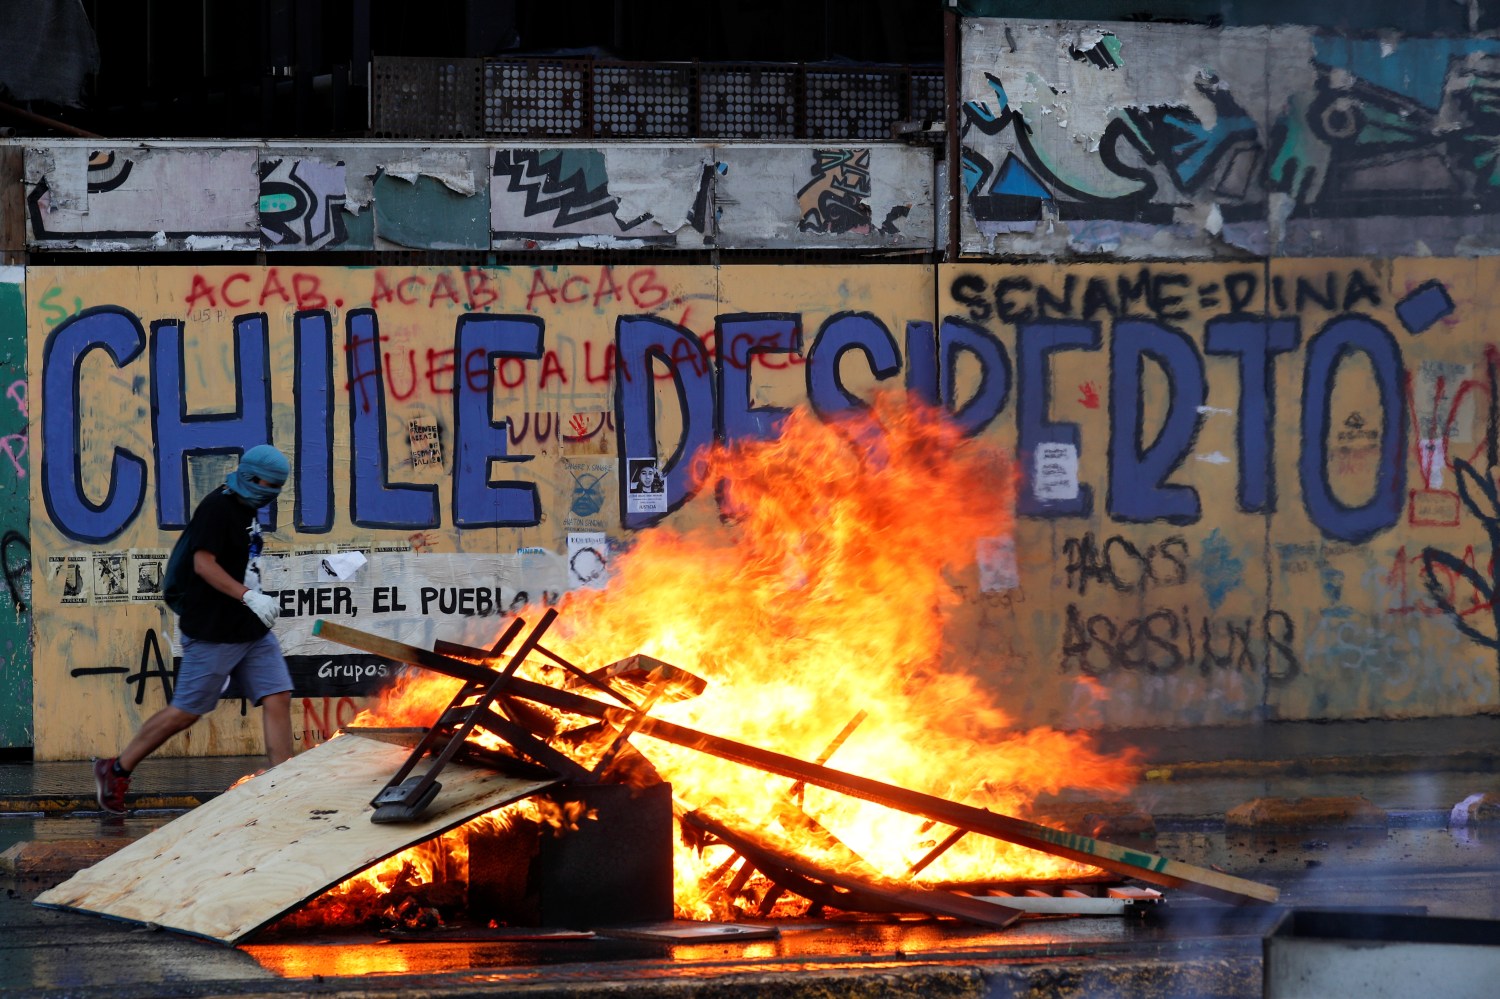 A demonstrator walks past a burning barricade during a protest against Chile's government in Santiago, Chile October 30, 2019. The graffiti on the wall reads: "Chile woke up". REUTERS/Jorge Silva - RC1AFD58CC70